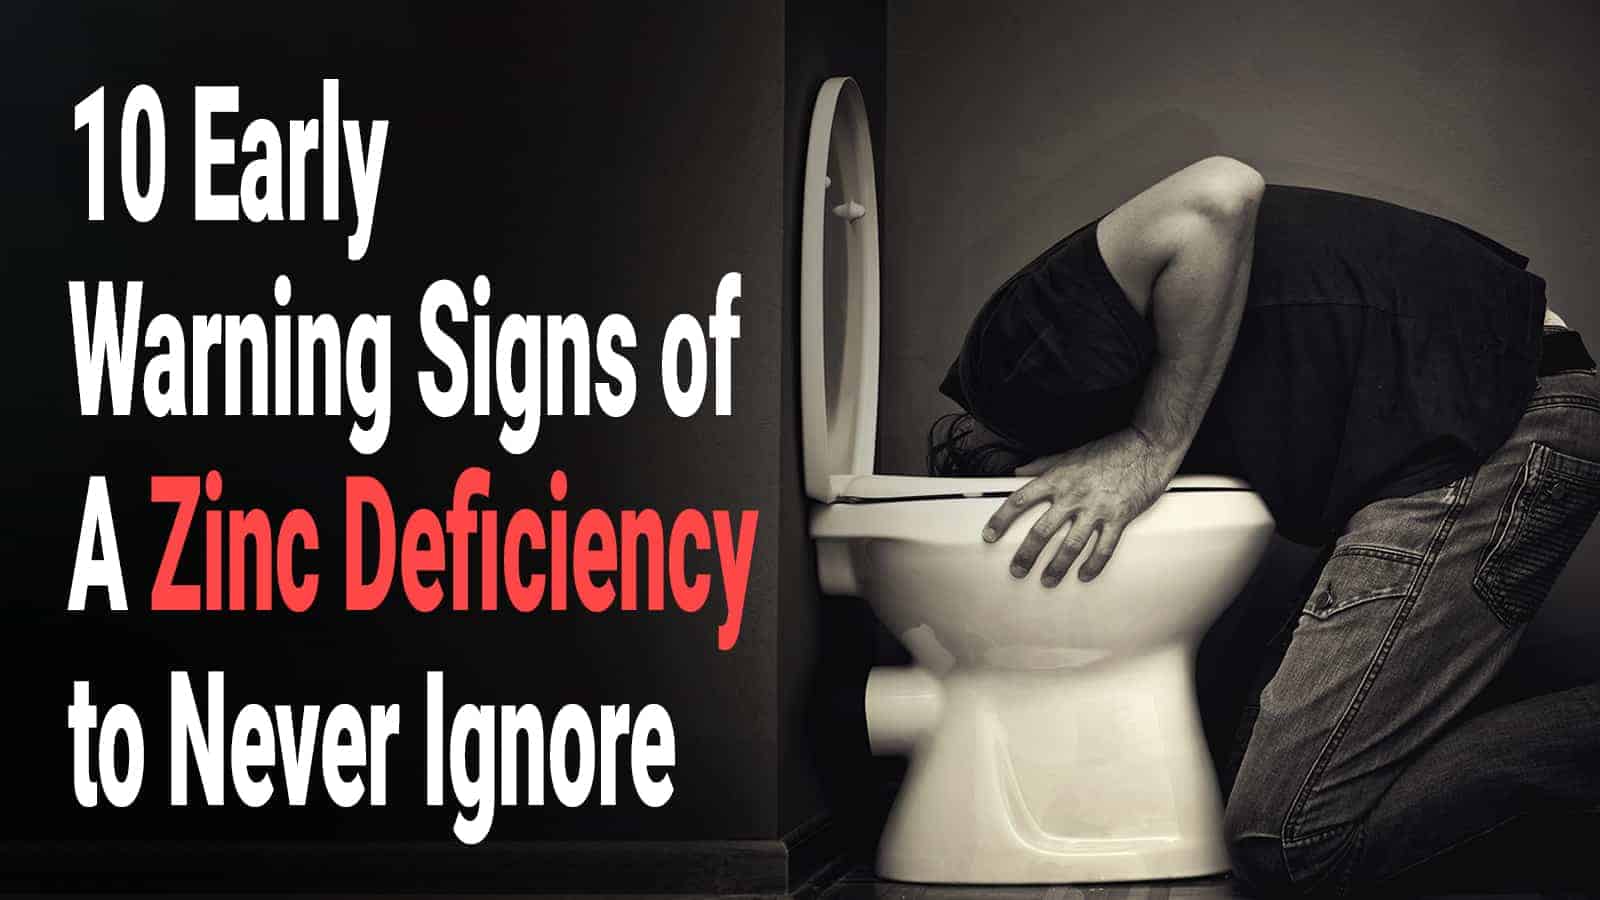 10 Early Warning Signs of A Zinc Deficiency to Never Ignore